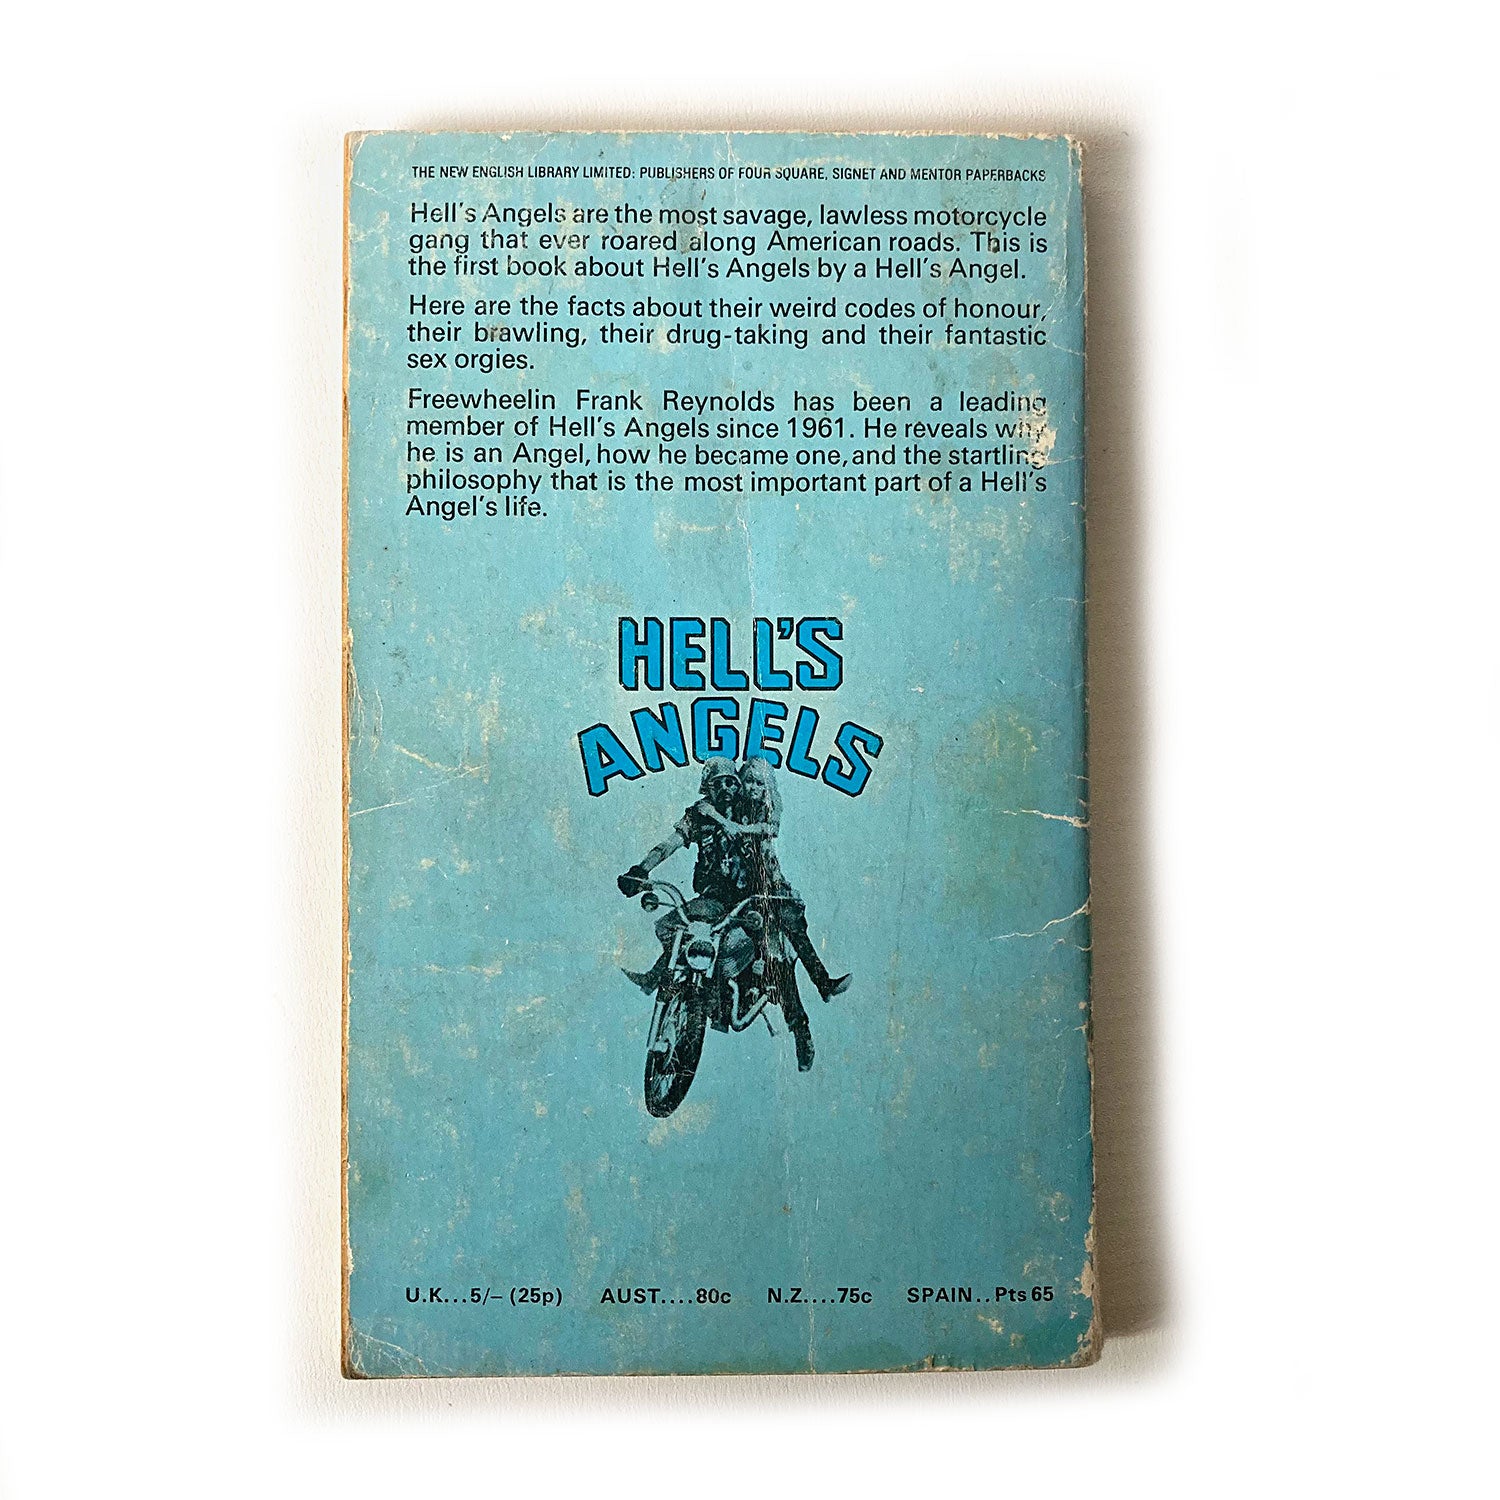 Freewheelin Frank, The true story of Hell's Angels by a Hell's Angel, New English Library edition, 1971